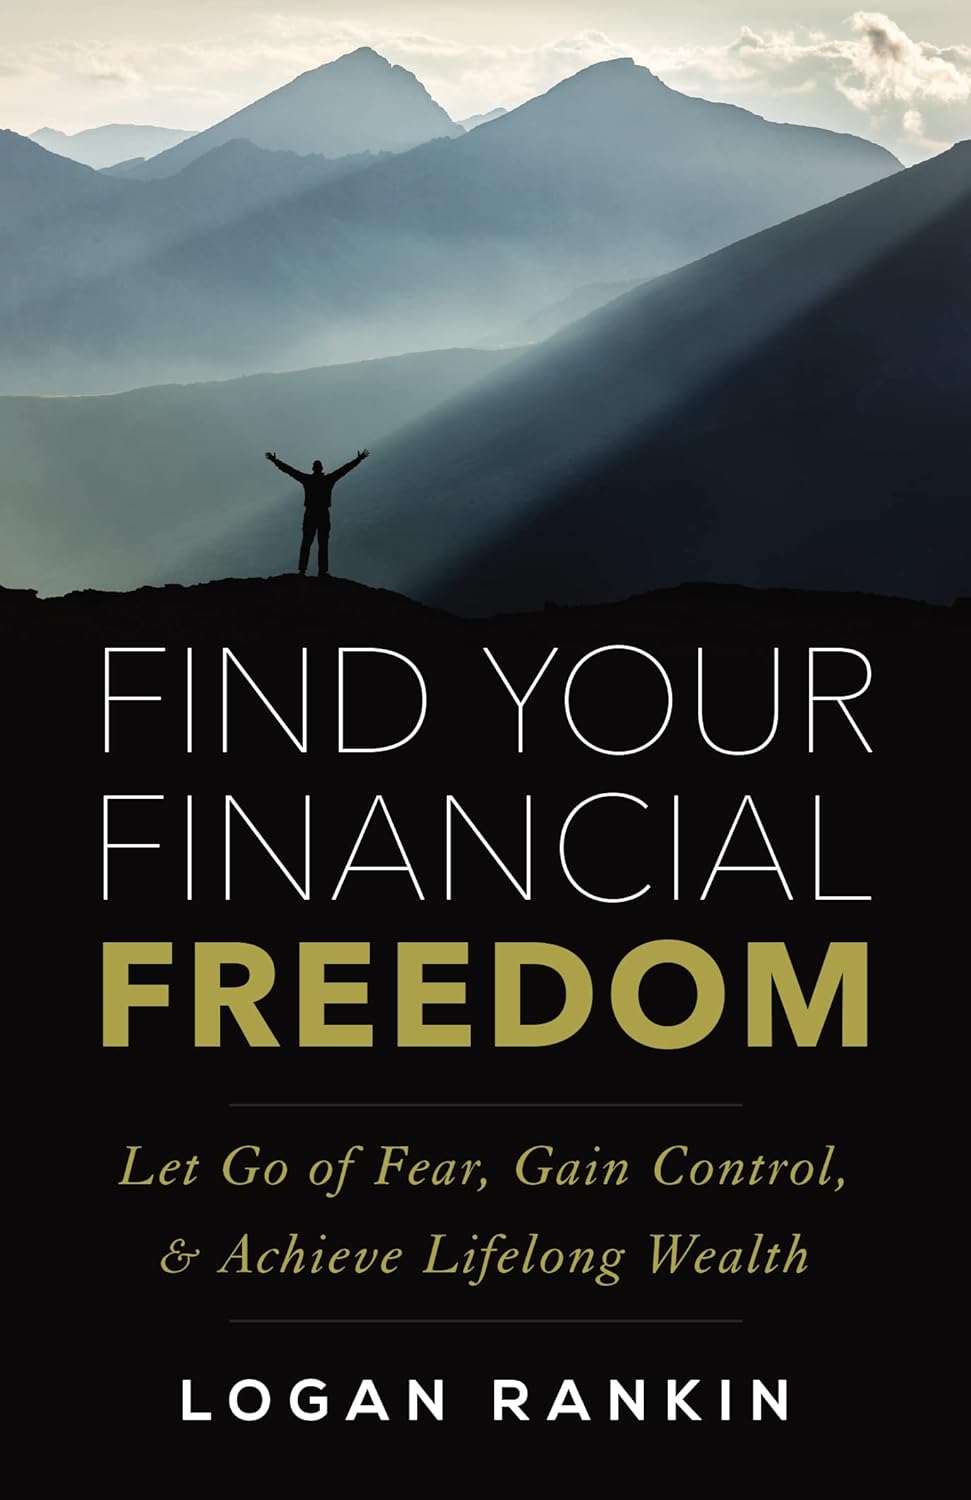 Find Your Financial Freedom: Let Go of Fear, Gain Control, & Achieve Lifelong Wealth 